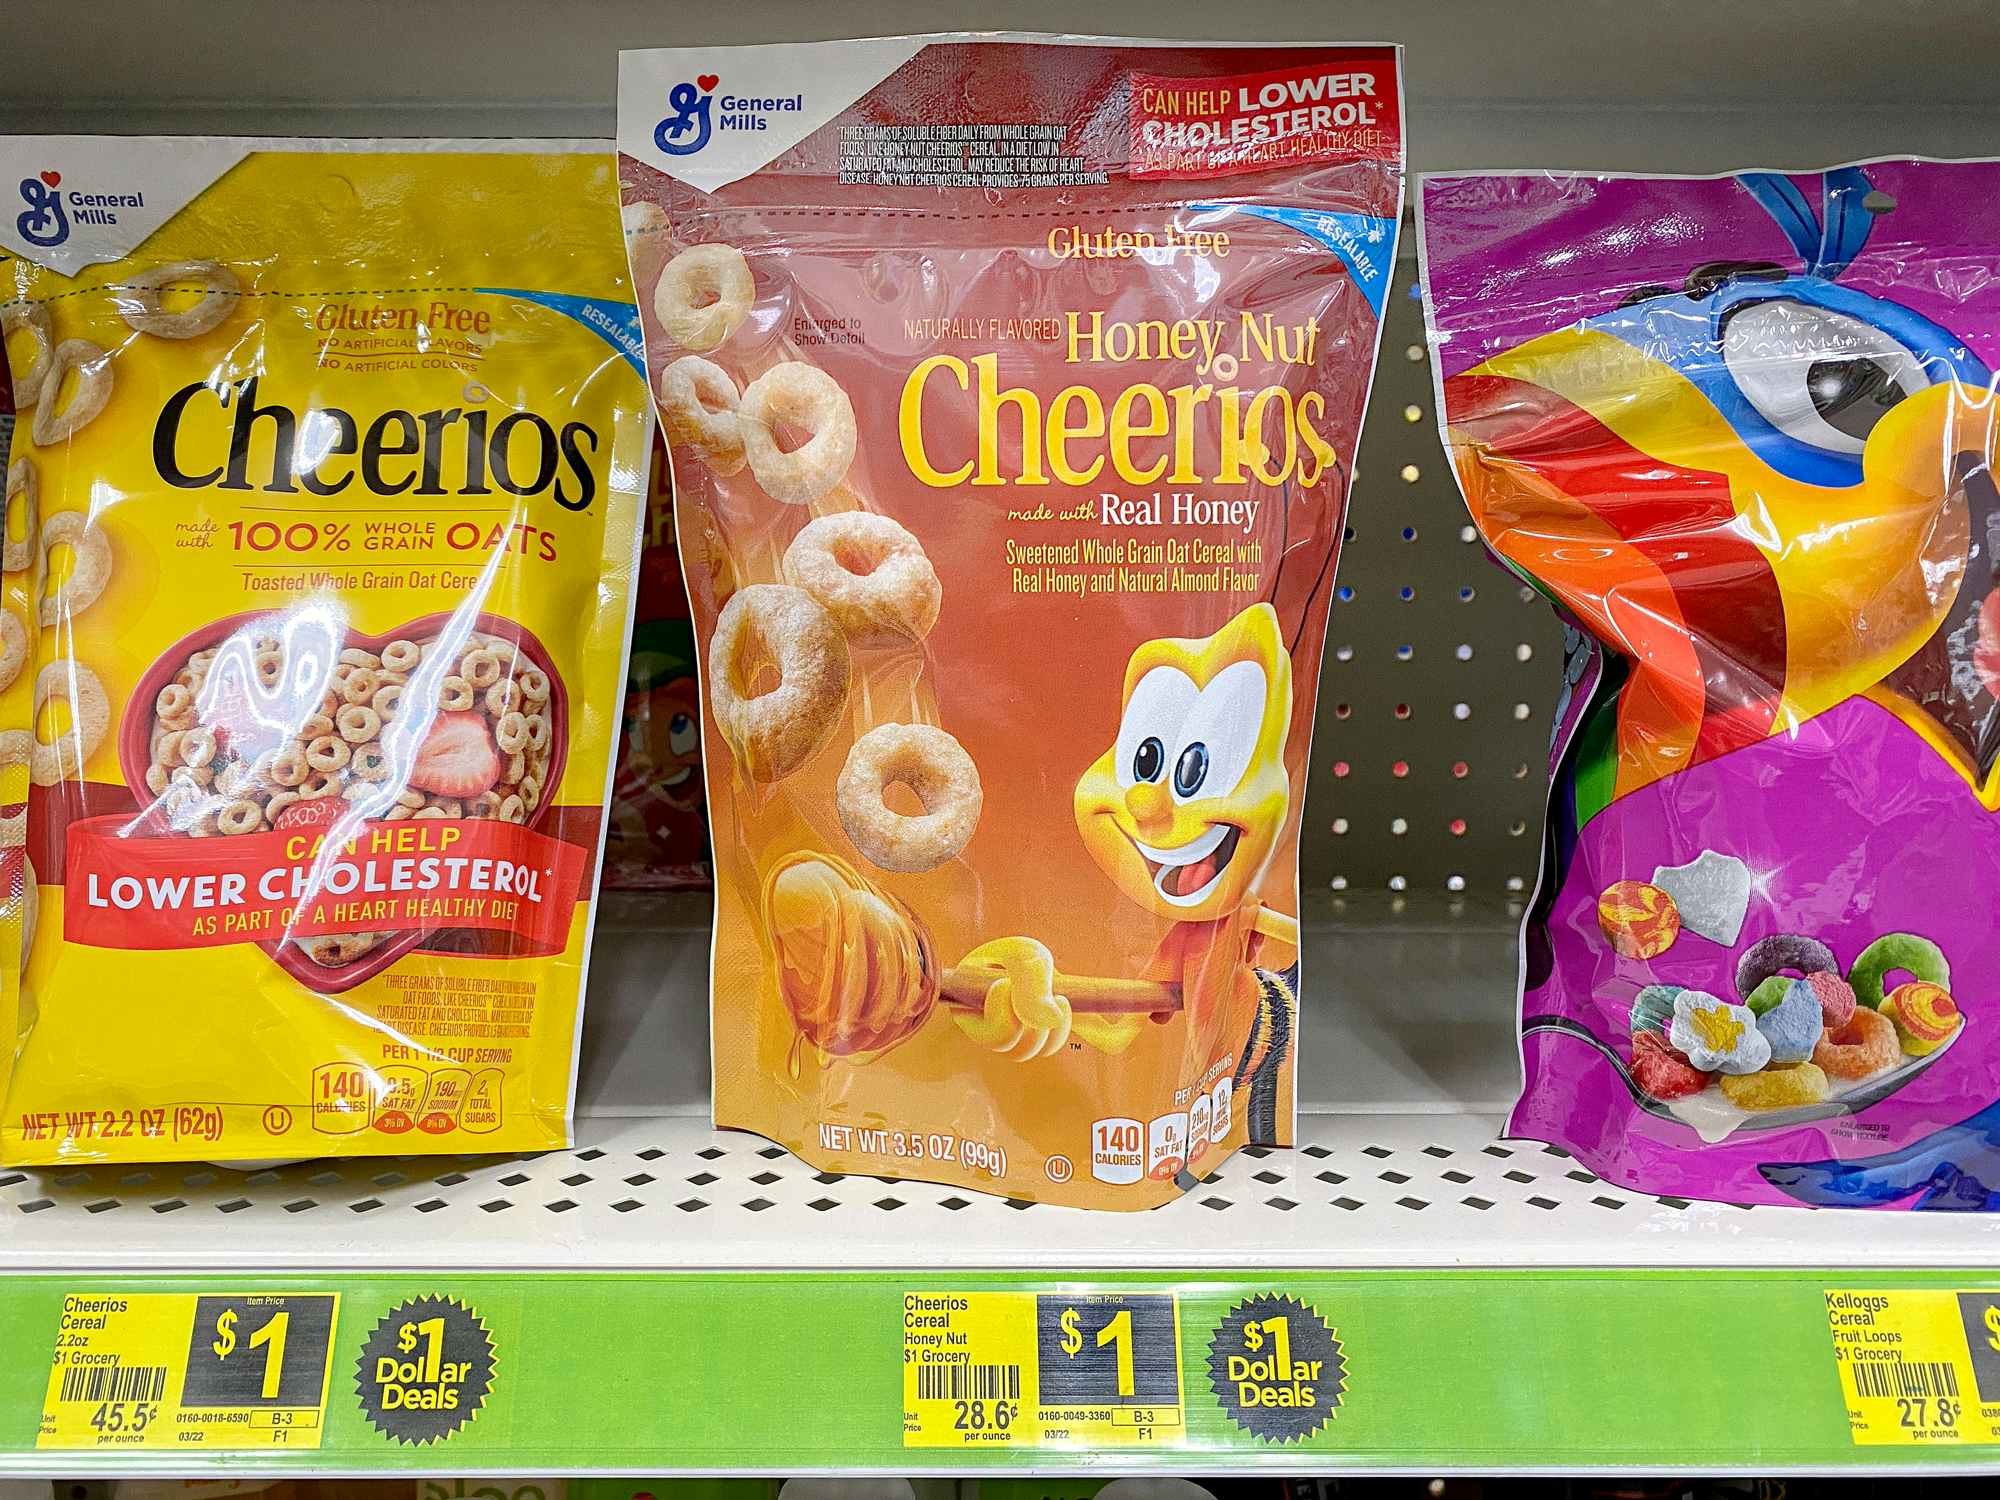 10 Surprising Foods to Buy at the Dollar Store